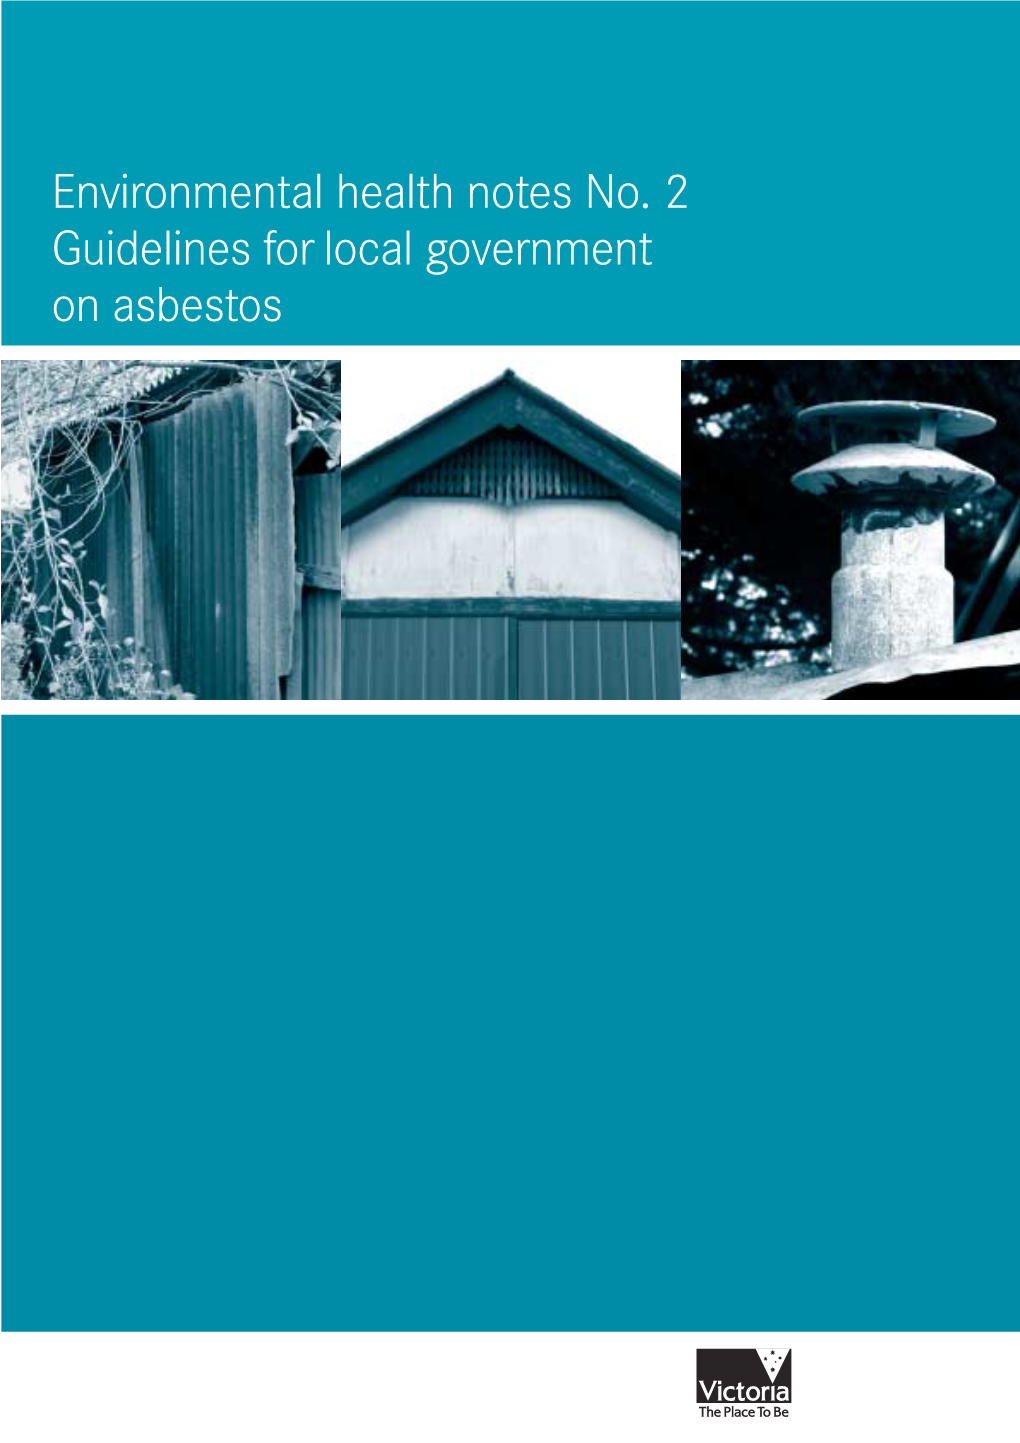 Environmental Health Notes No. 2 Guidelines for Local Government on Asbestos